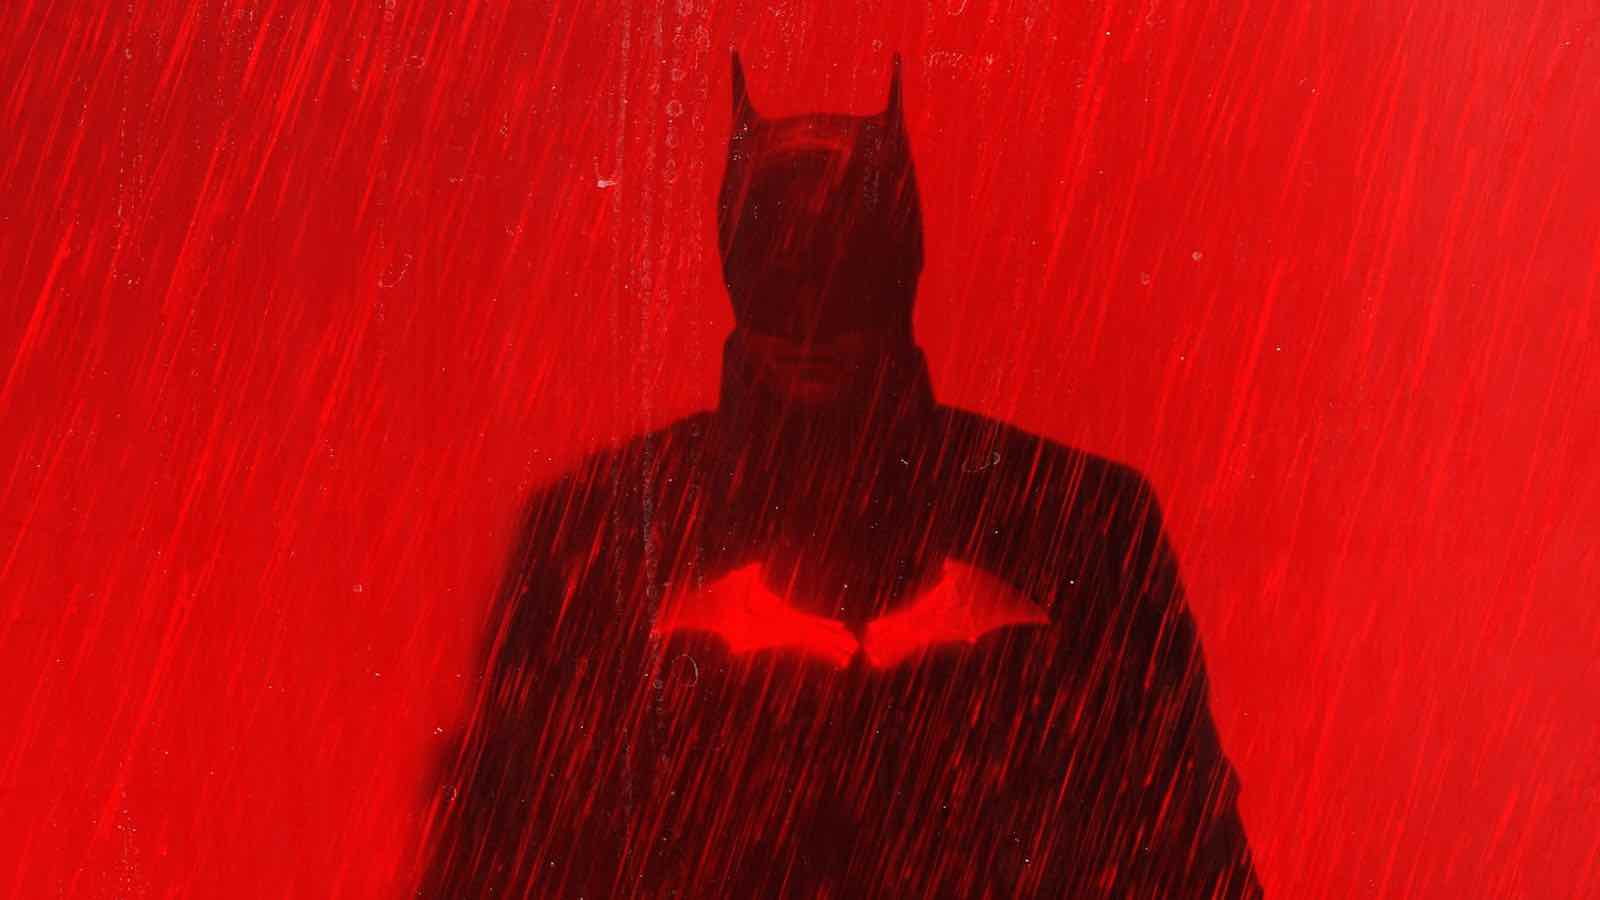 (123movies) Watch ‘The Batman’ (2022) Free Online Streaming Here at Home – Movie Daily